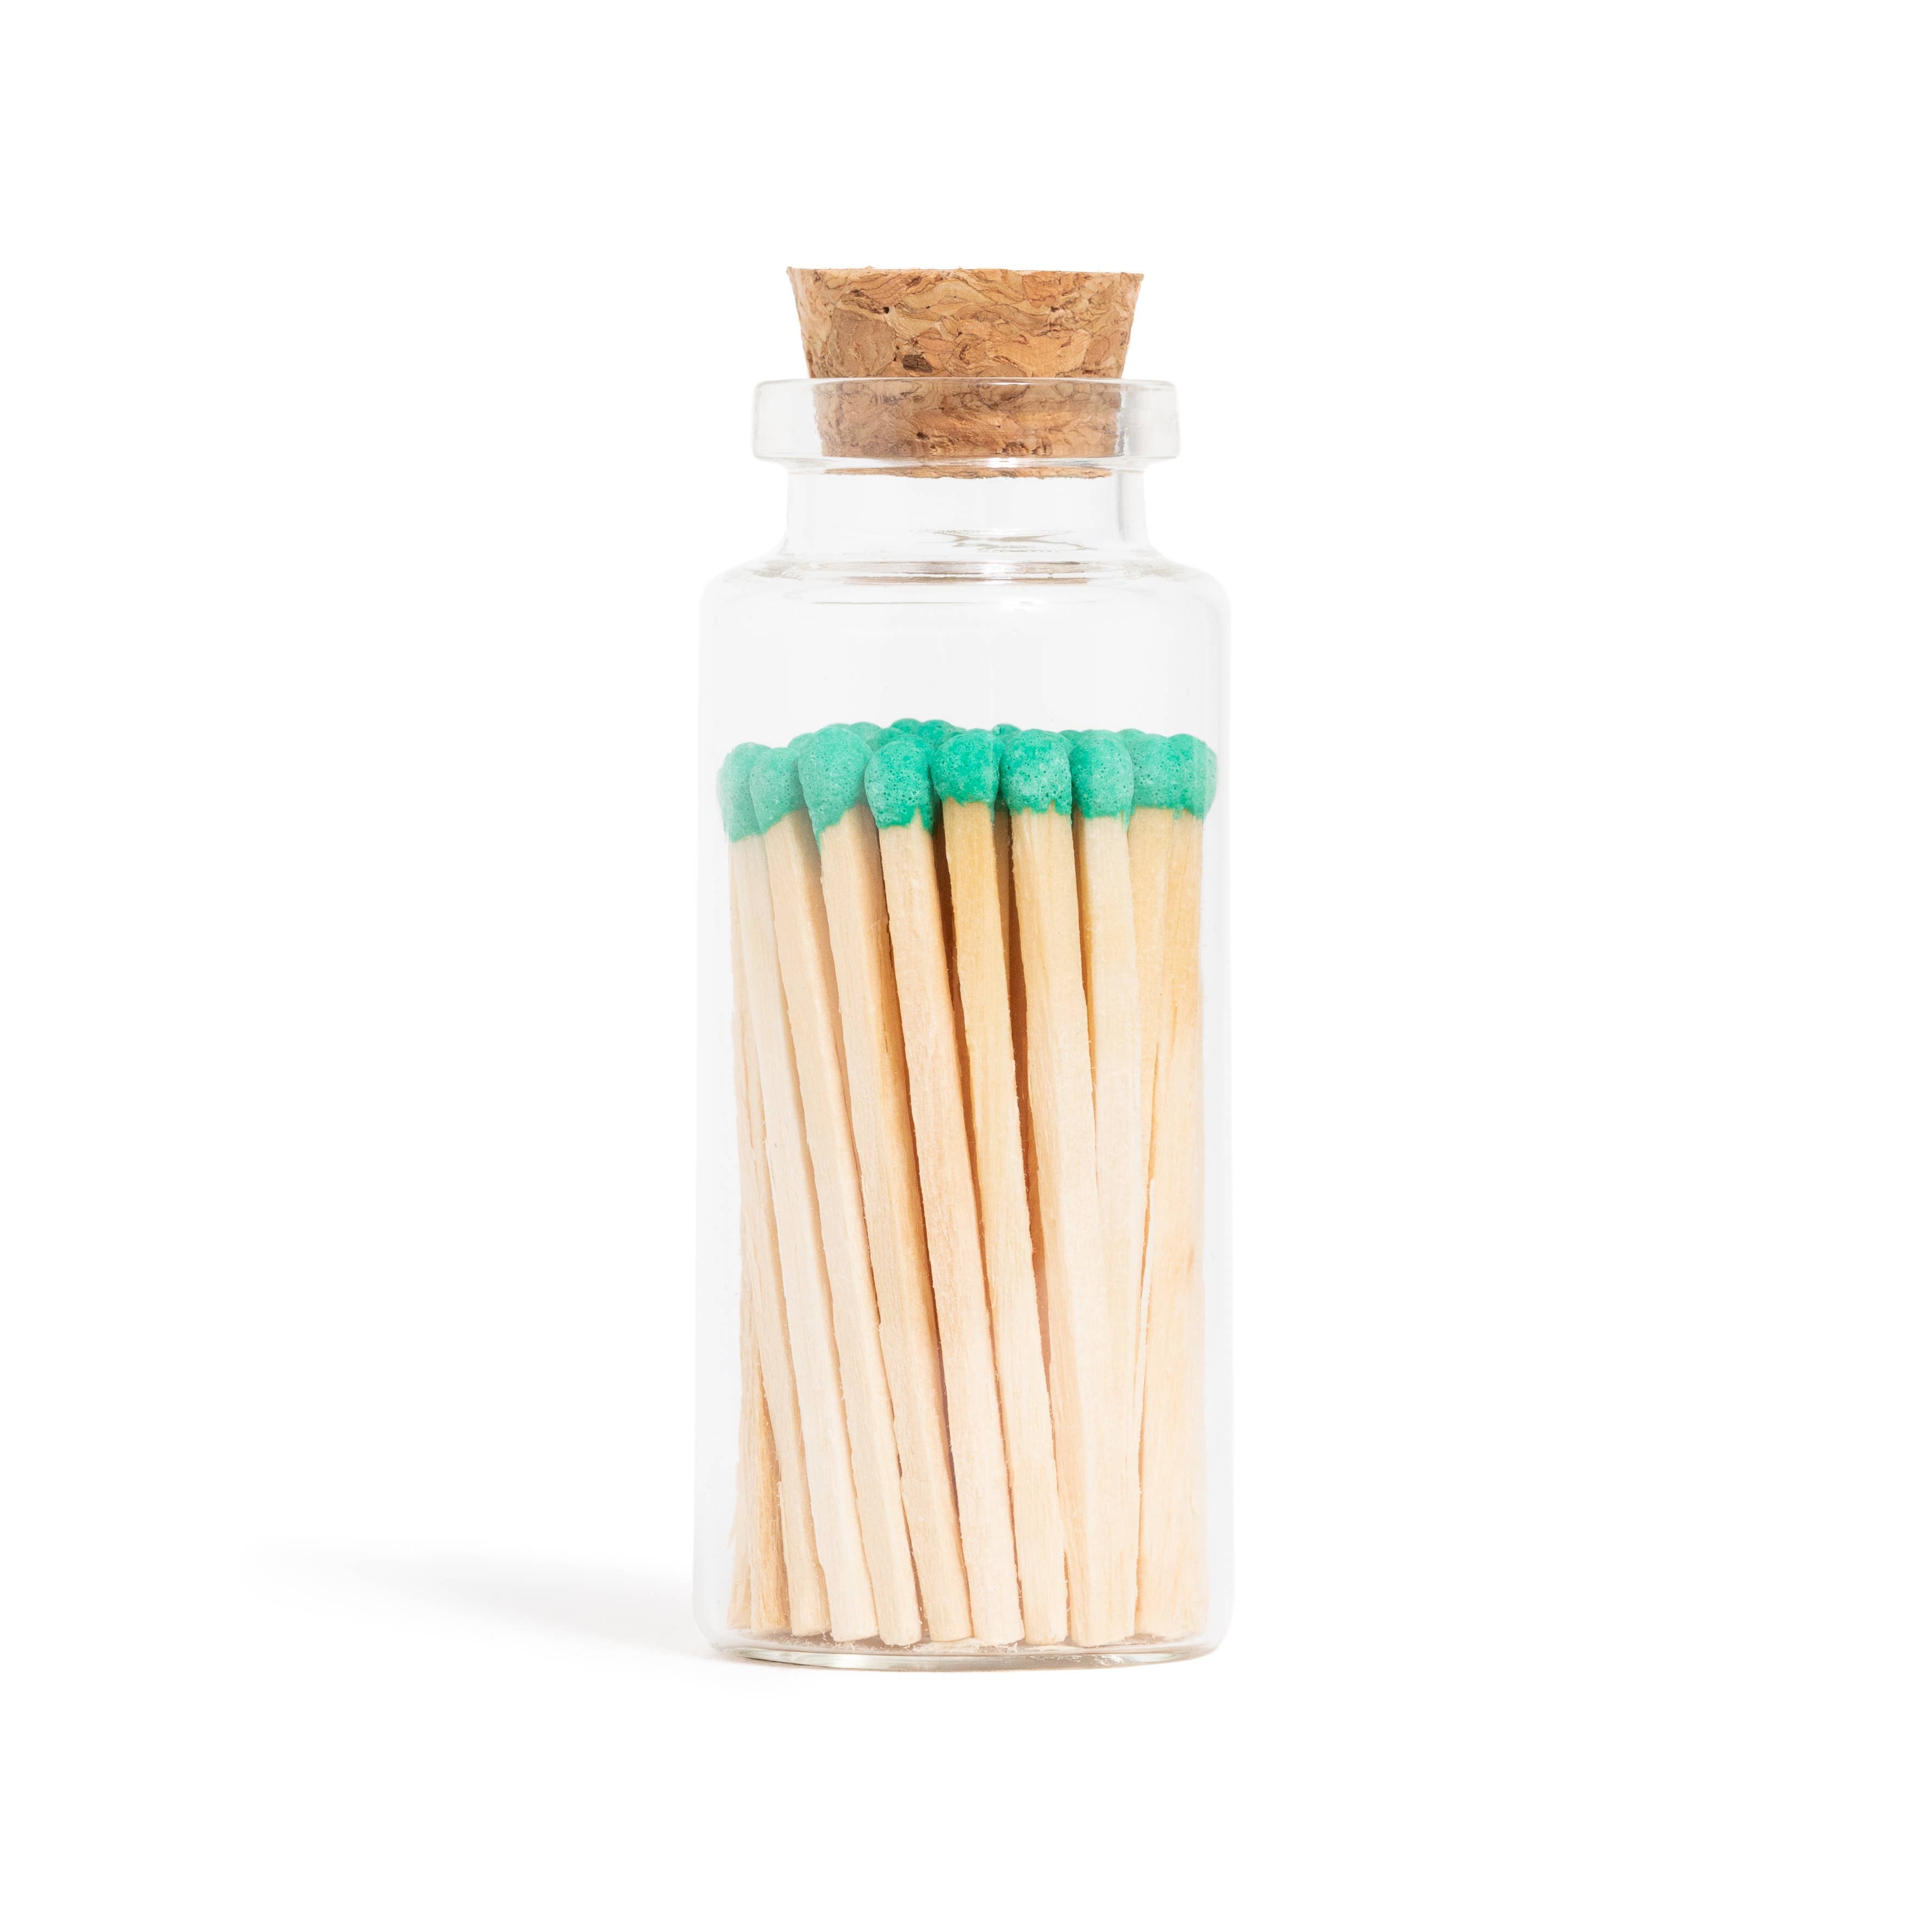 Emerald Green Matches in Medium Corked Vial